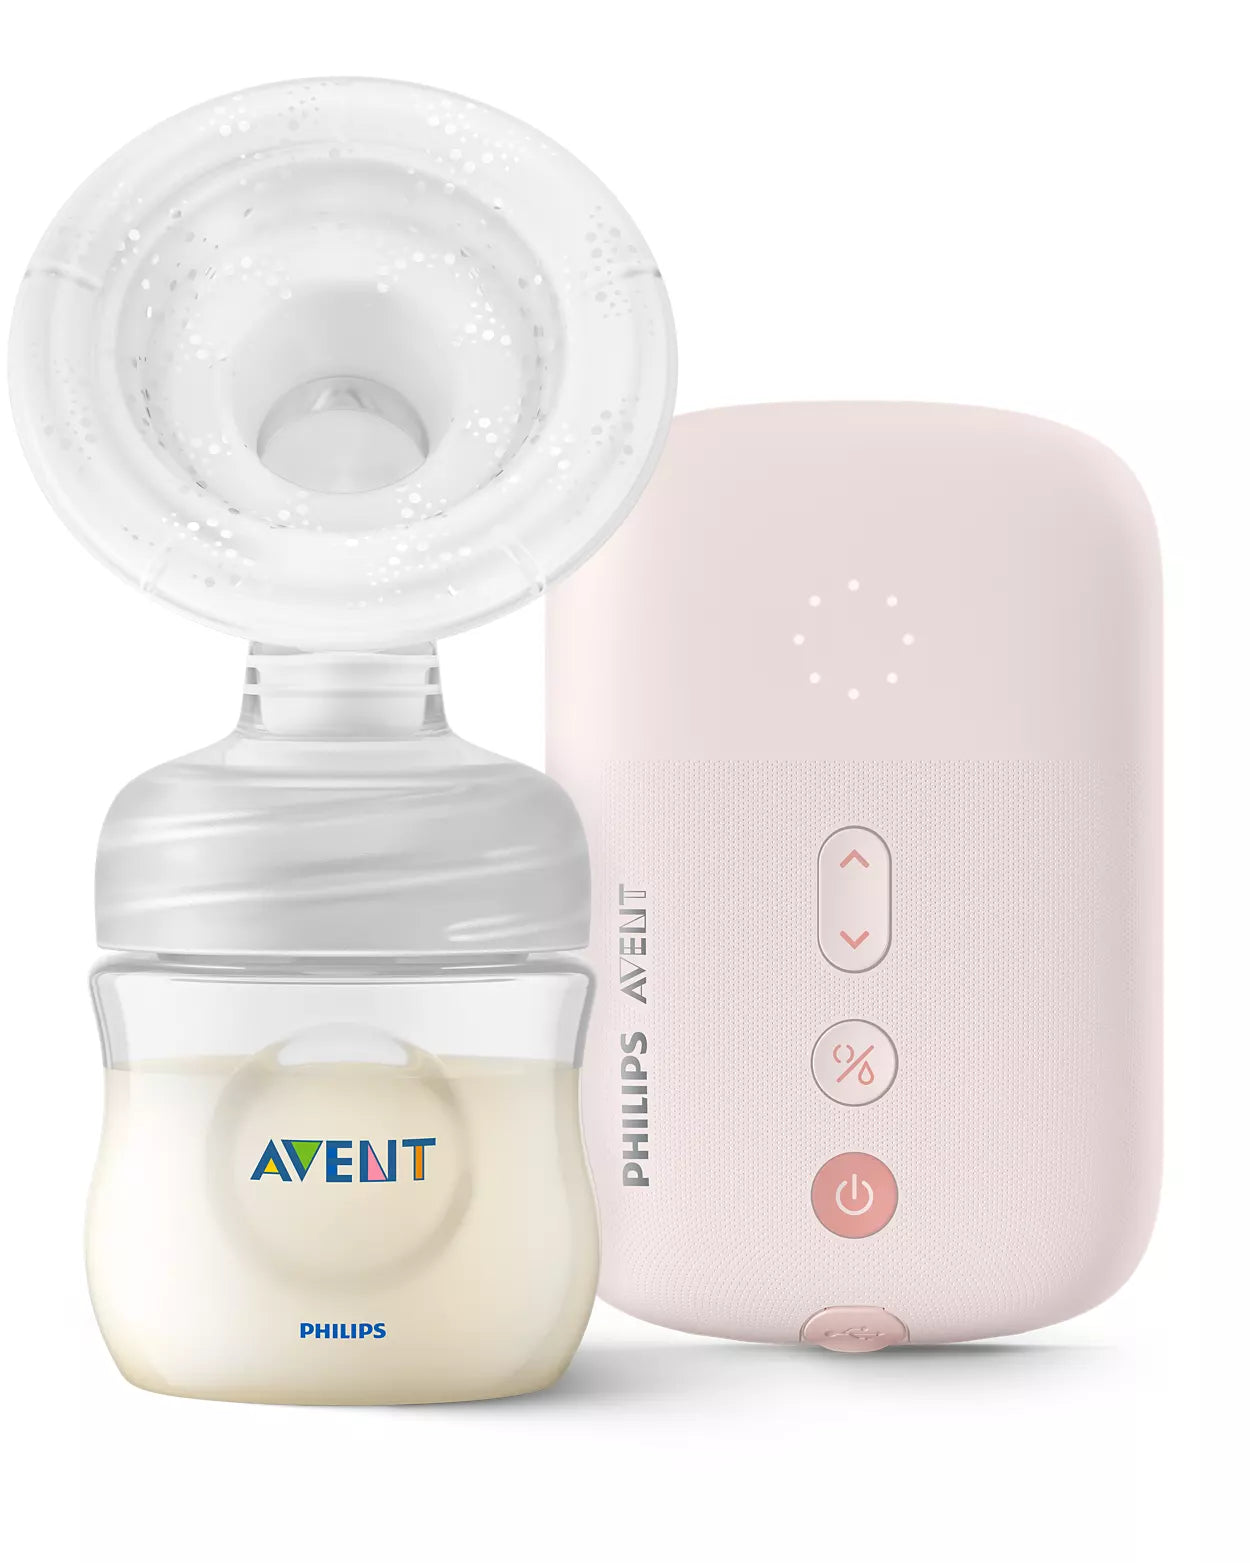 Philips Avent Electric Breast Pump BPA free New